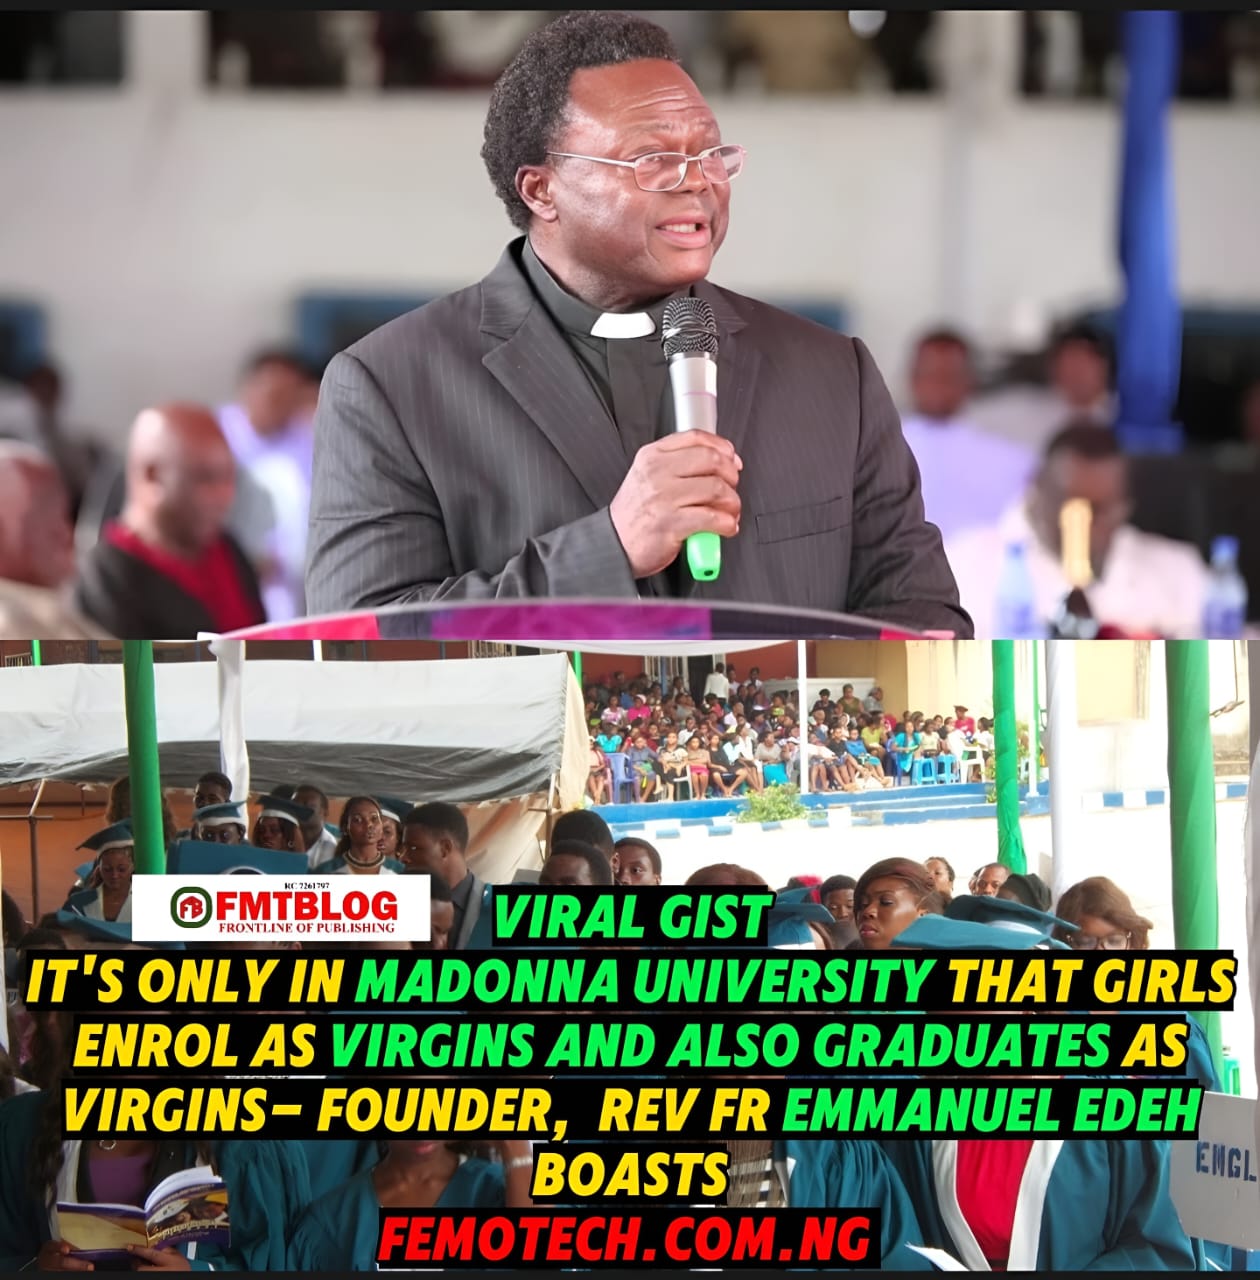 It’s Only In Madonna University That Girls Enrol As Virgins And Also Graduates As Virgins- Founder, Rev Fr Emmanuel Edeh Boasts (VIDEO)